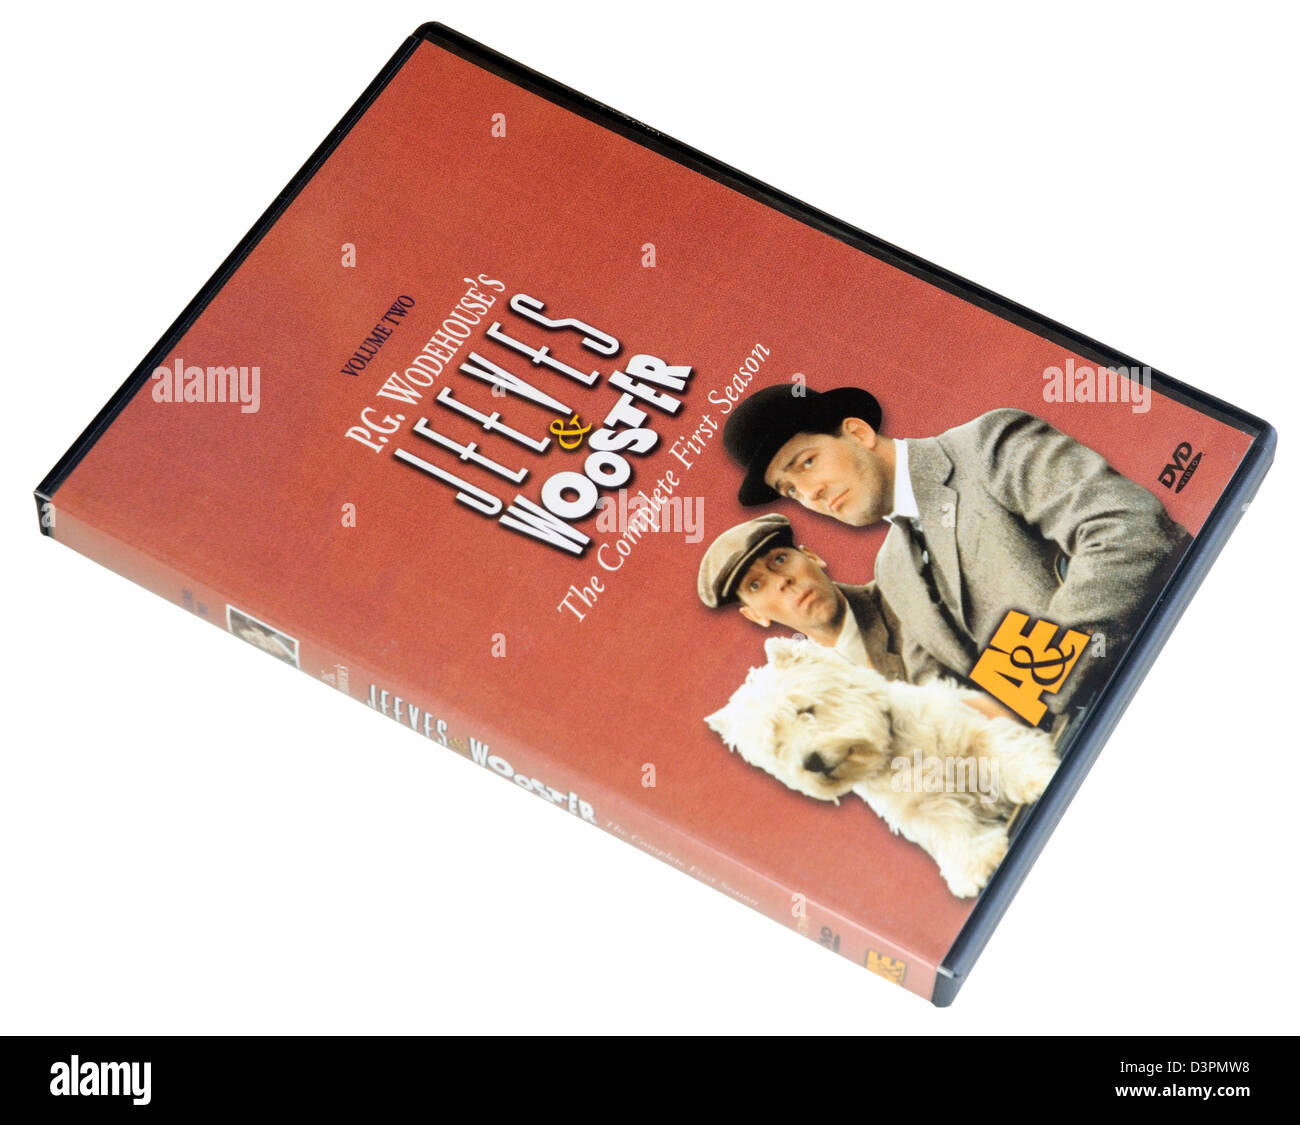 Stephen Fry e Hugh Laurie Jeeves e Wooster DVD Foto Stock